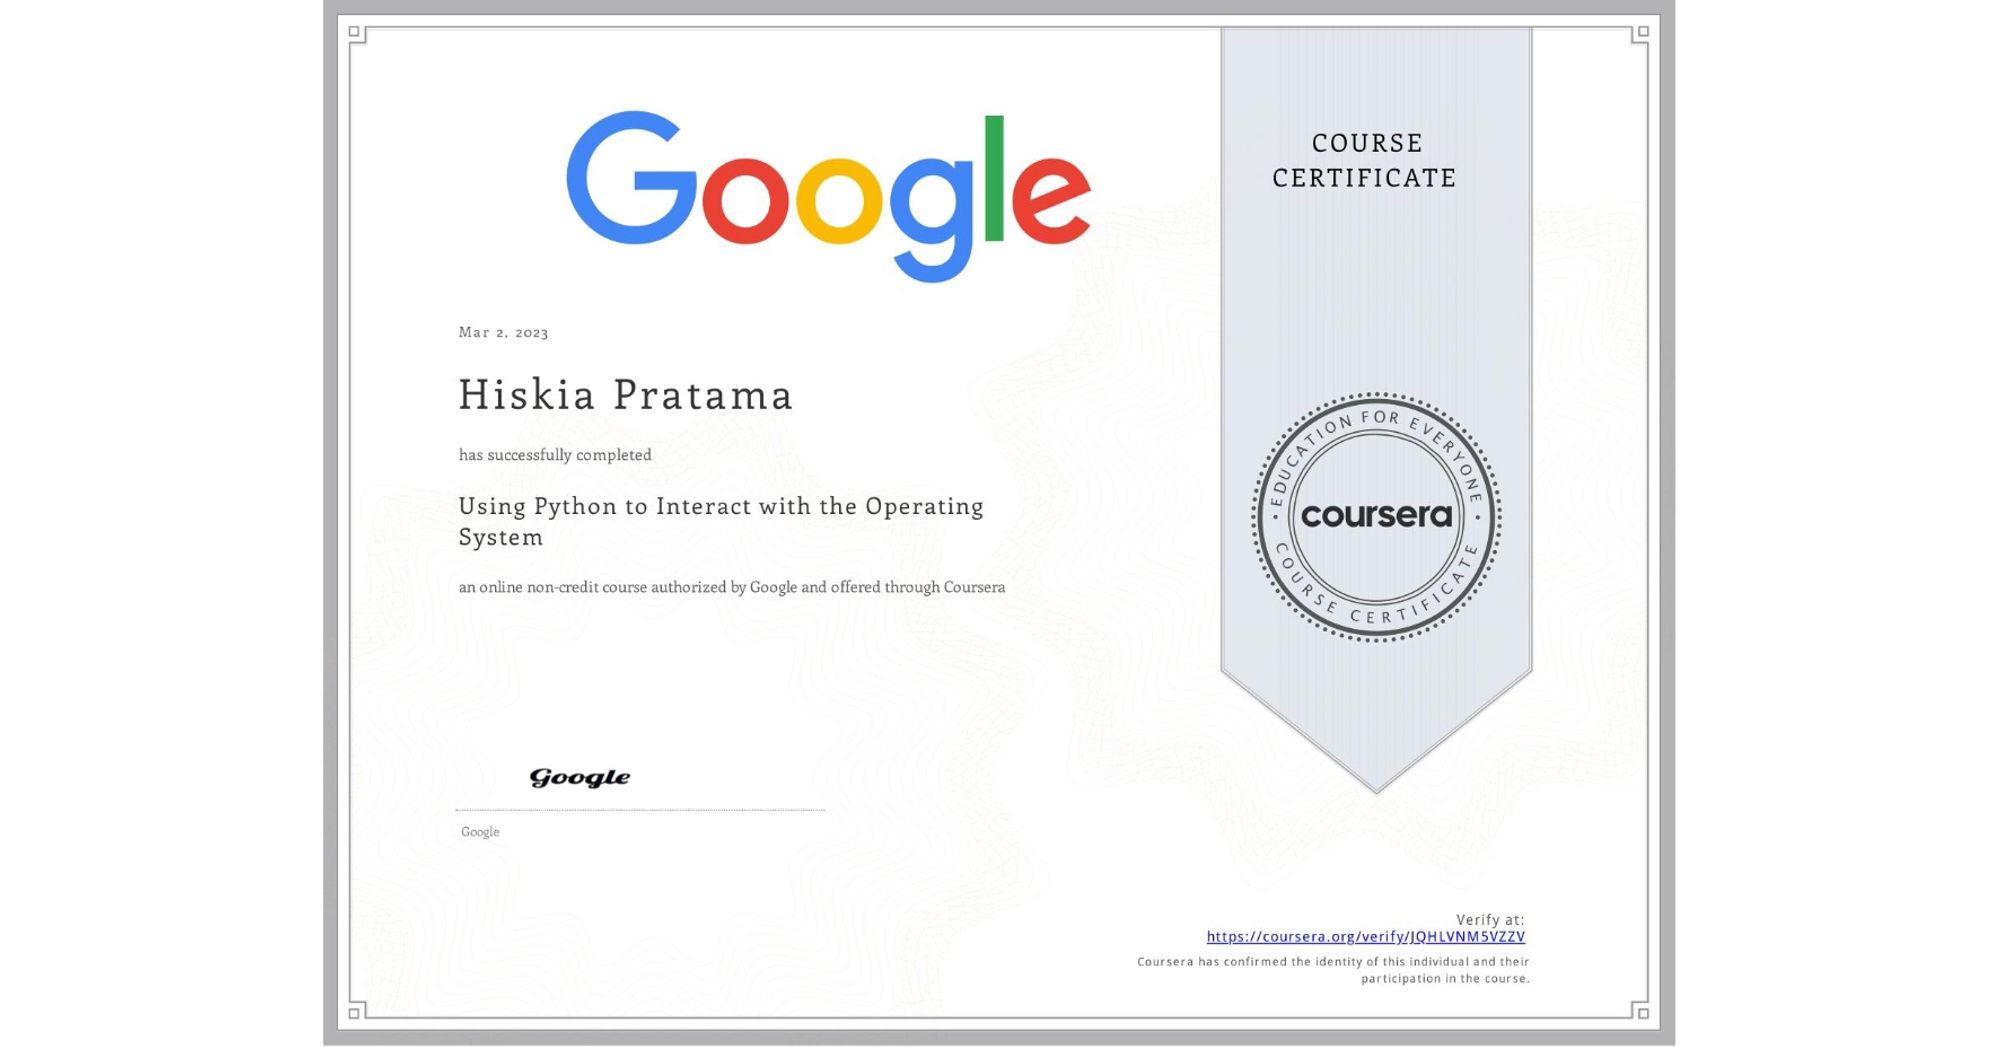 Completion Certificate for Using Python to Interact with the Operating System